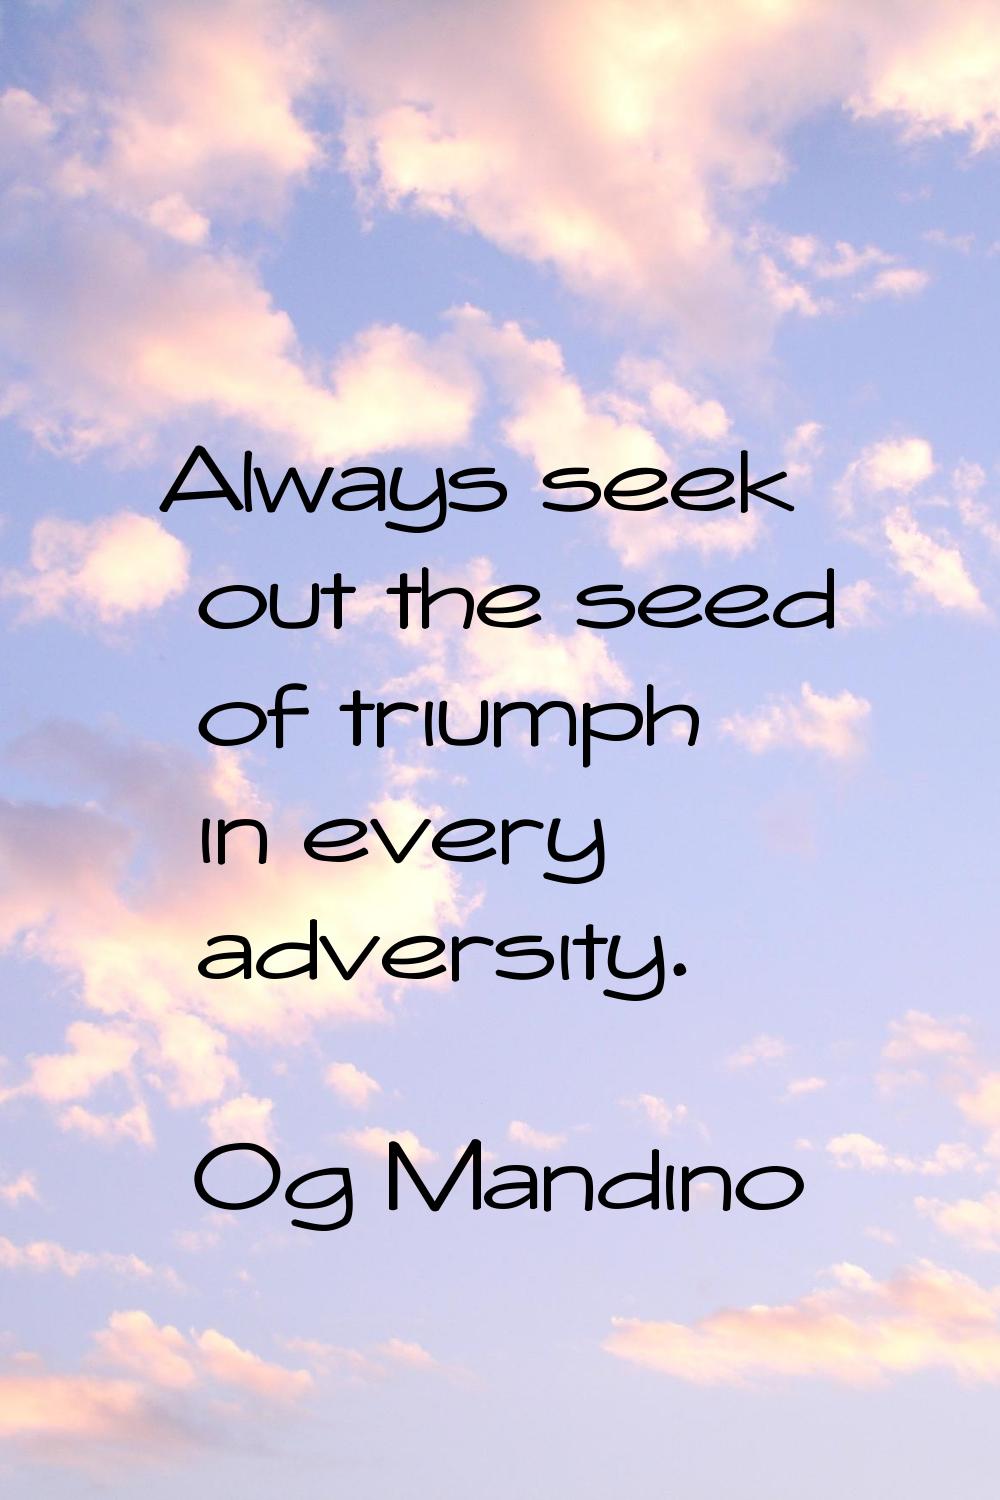 Always seek out the seed of triumph in every adversity.